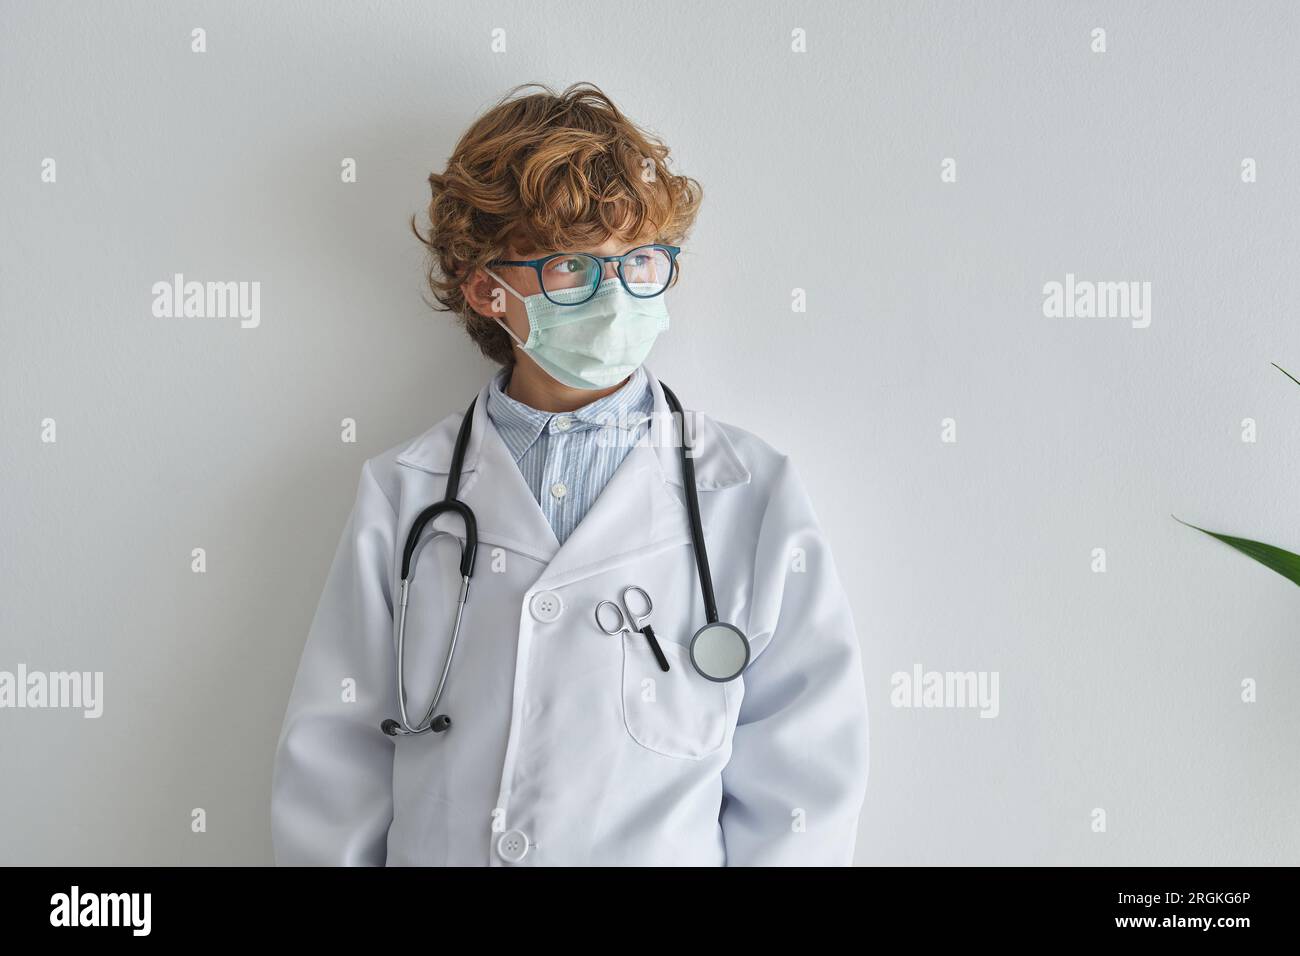 Contemplative child in eyeglasses and disposable mask with stethoscope on medical uniform looking away on white background Stock Photo